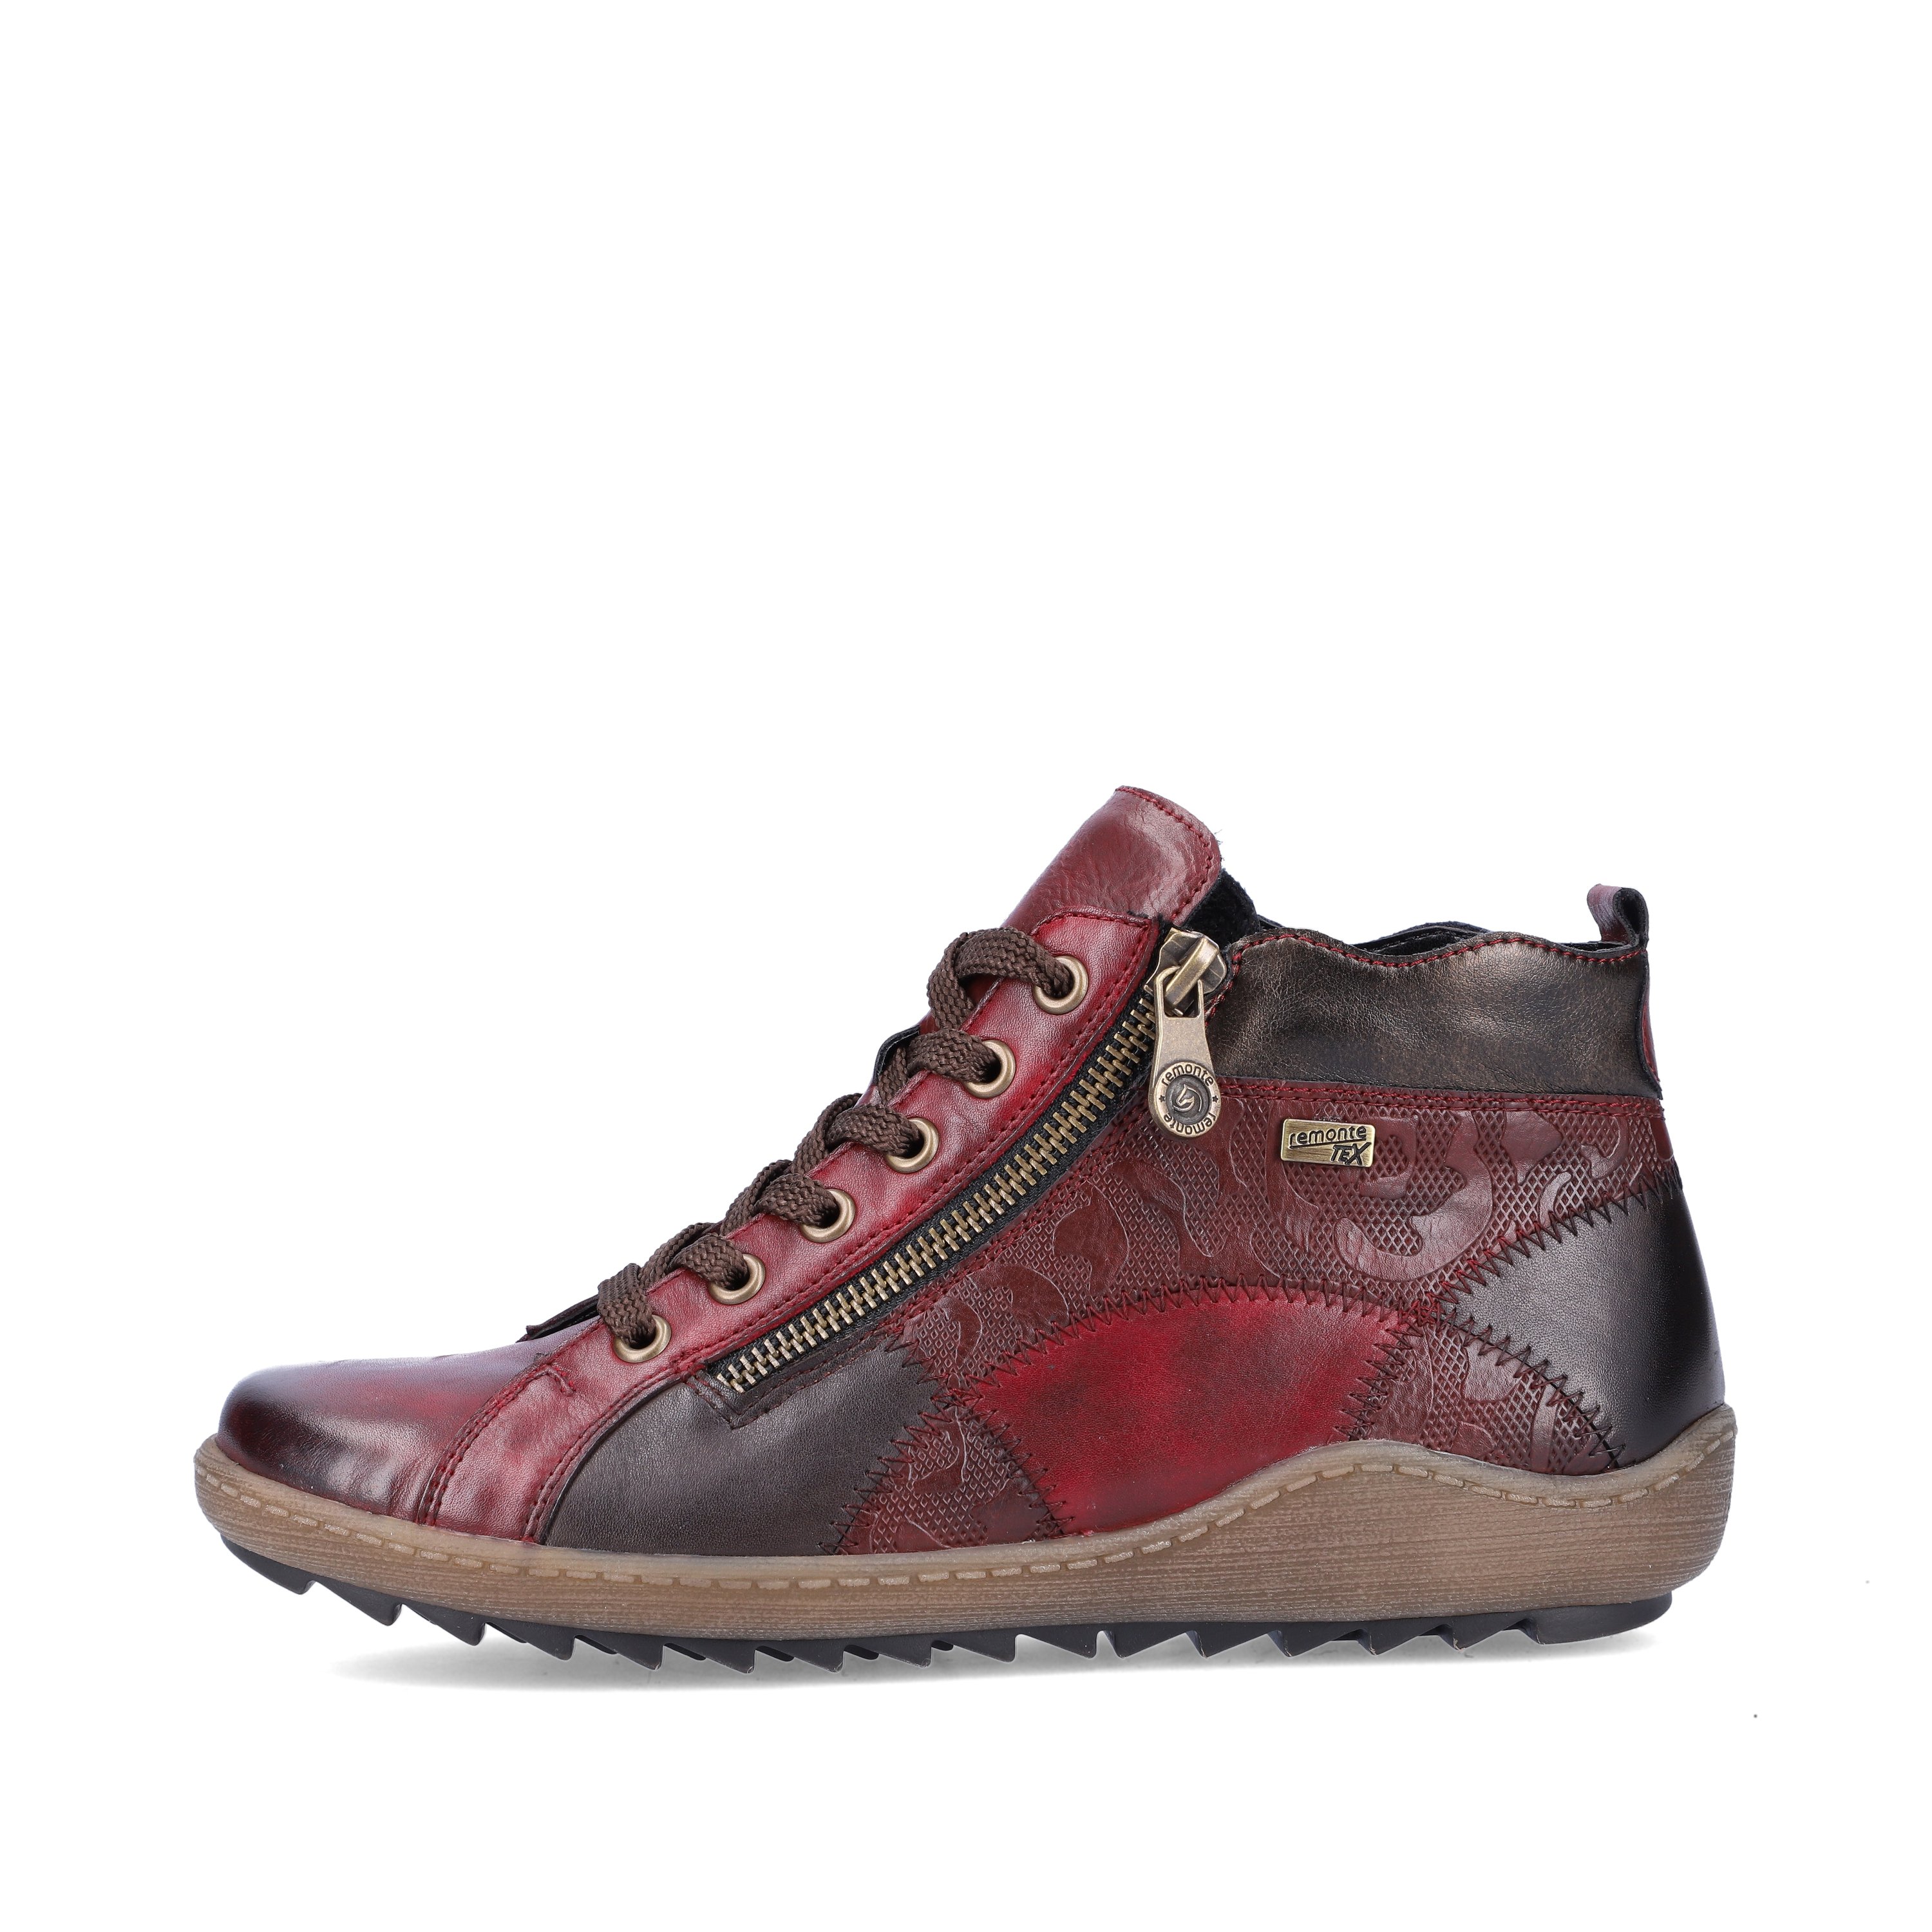 Raspberry red remonte women´s lace-up shoes R1467-35 with lacing and zipper. The outside of the shoe